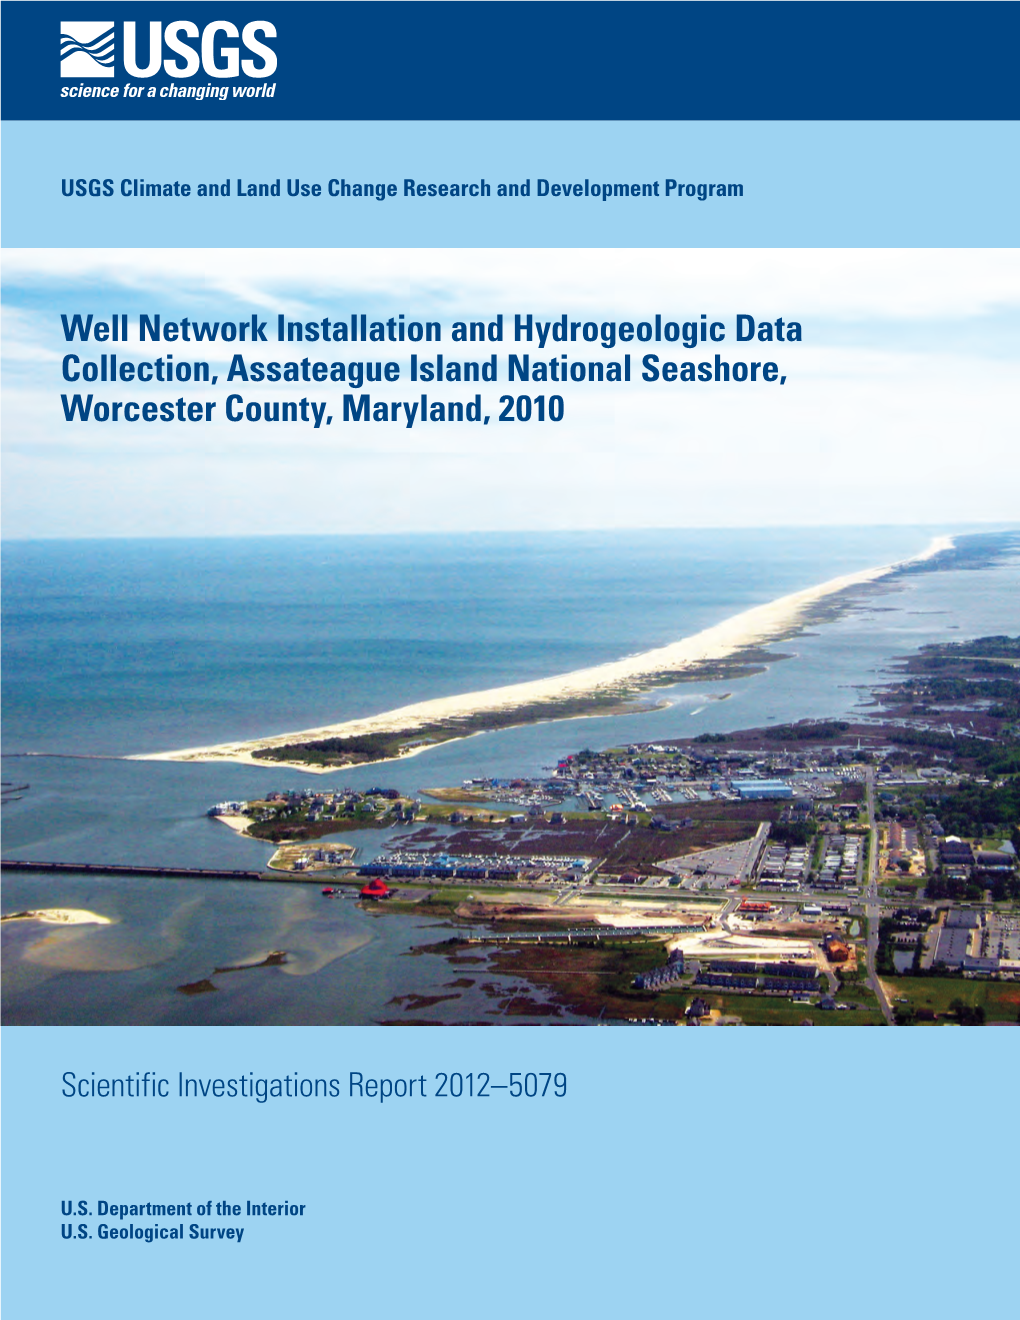 Well Network Installation and Hydrogeologic Data Collection, Assateague Island National Seashore, Worcester County, Maryland, 2010